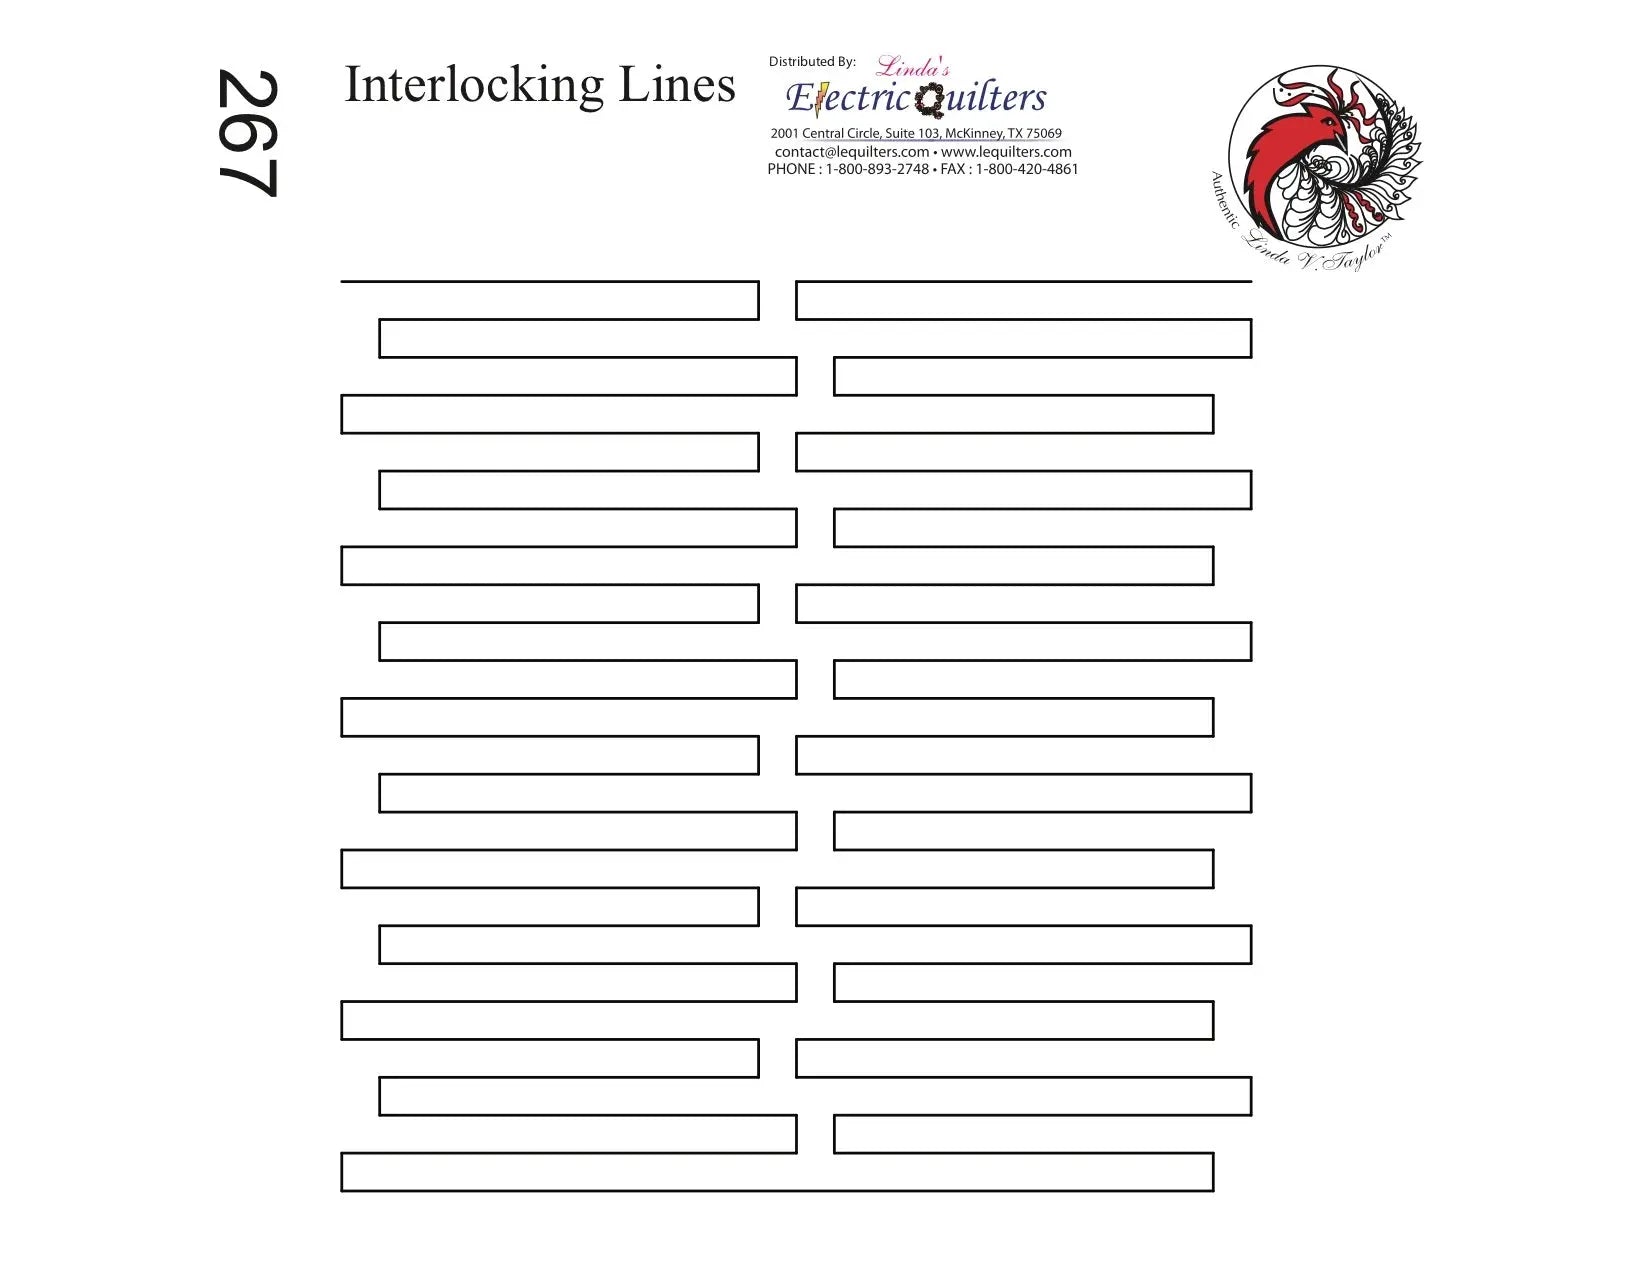 267 Interlocking Lines Pantograph by Linda V. Taylor - Linda's Electric Quilters